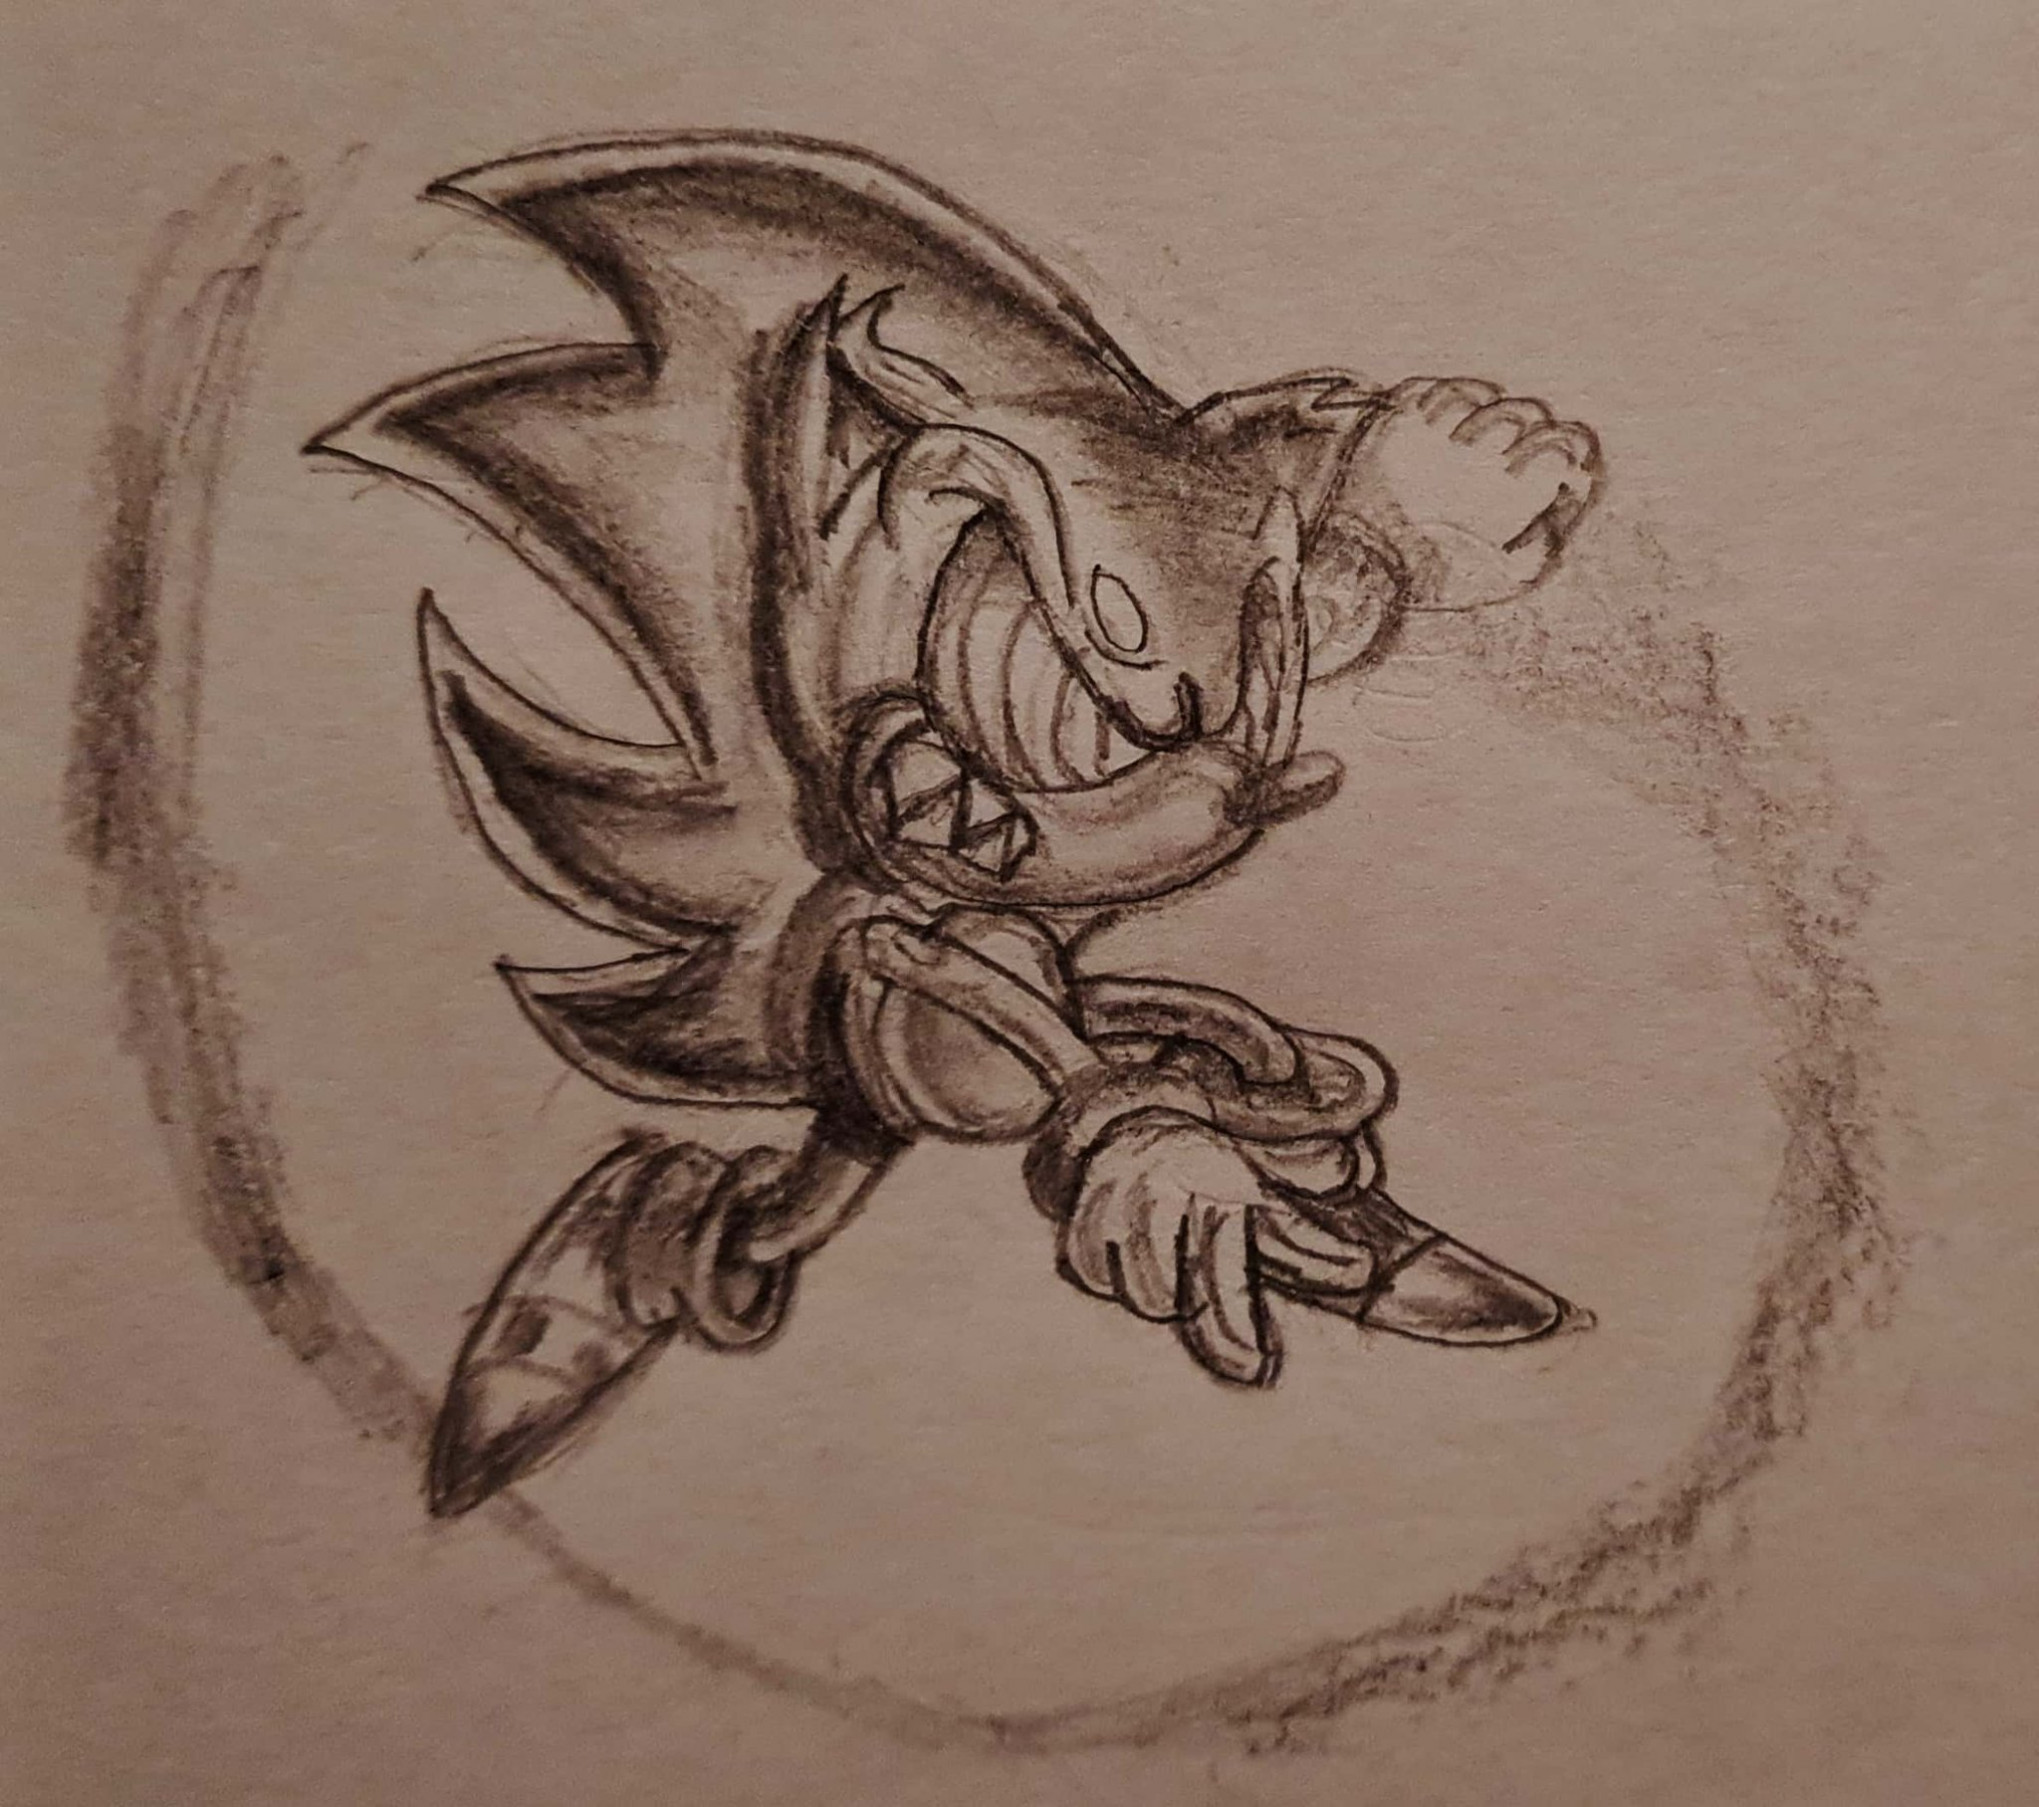 Super Sonic Sketch by Heilos | Sonic, Sonic and shadow, Sonic art